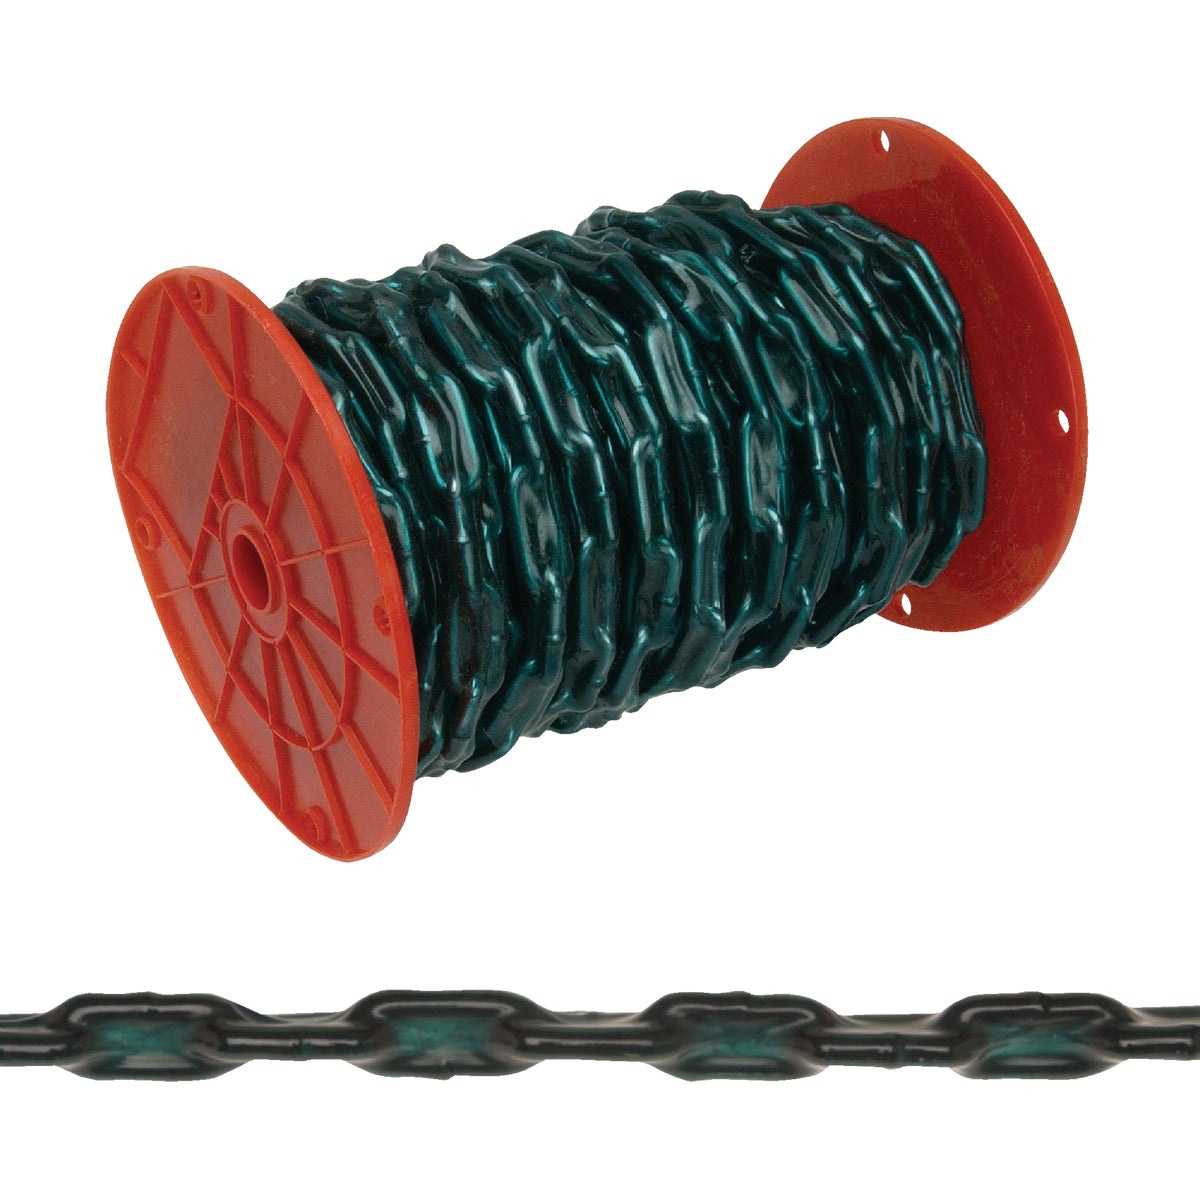 Item 769082, Straight link chain ideal for use as swing set chain.